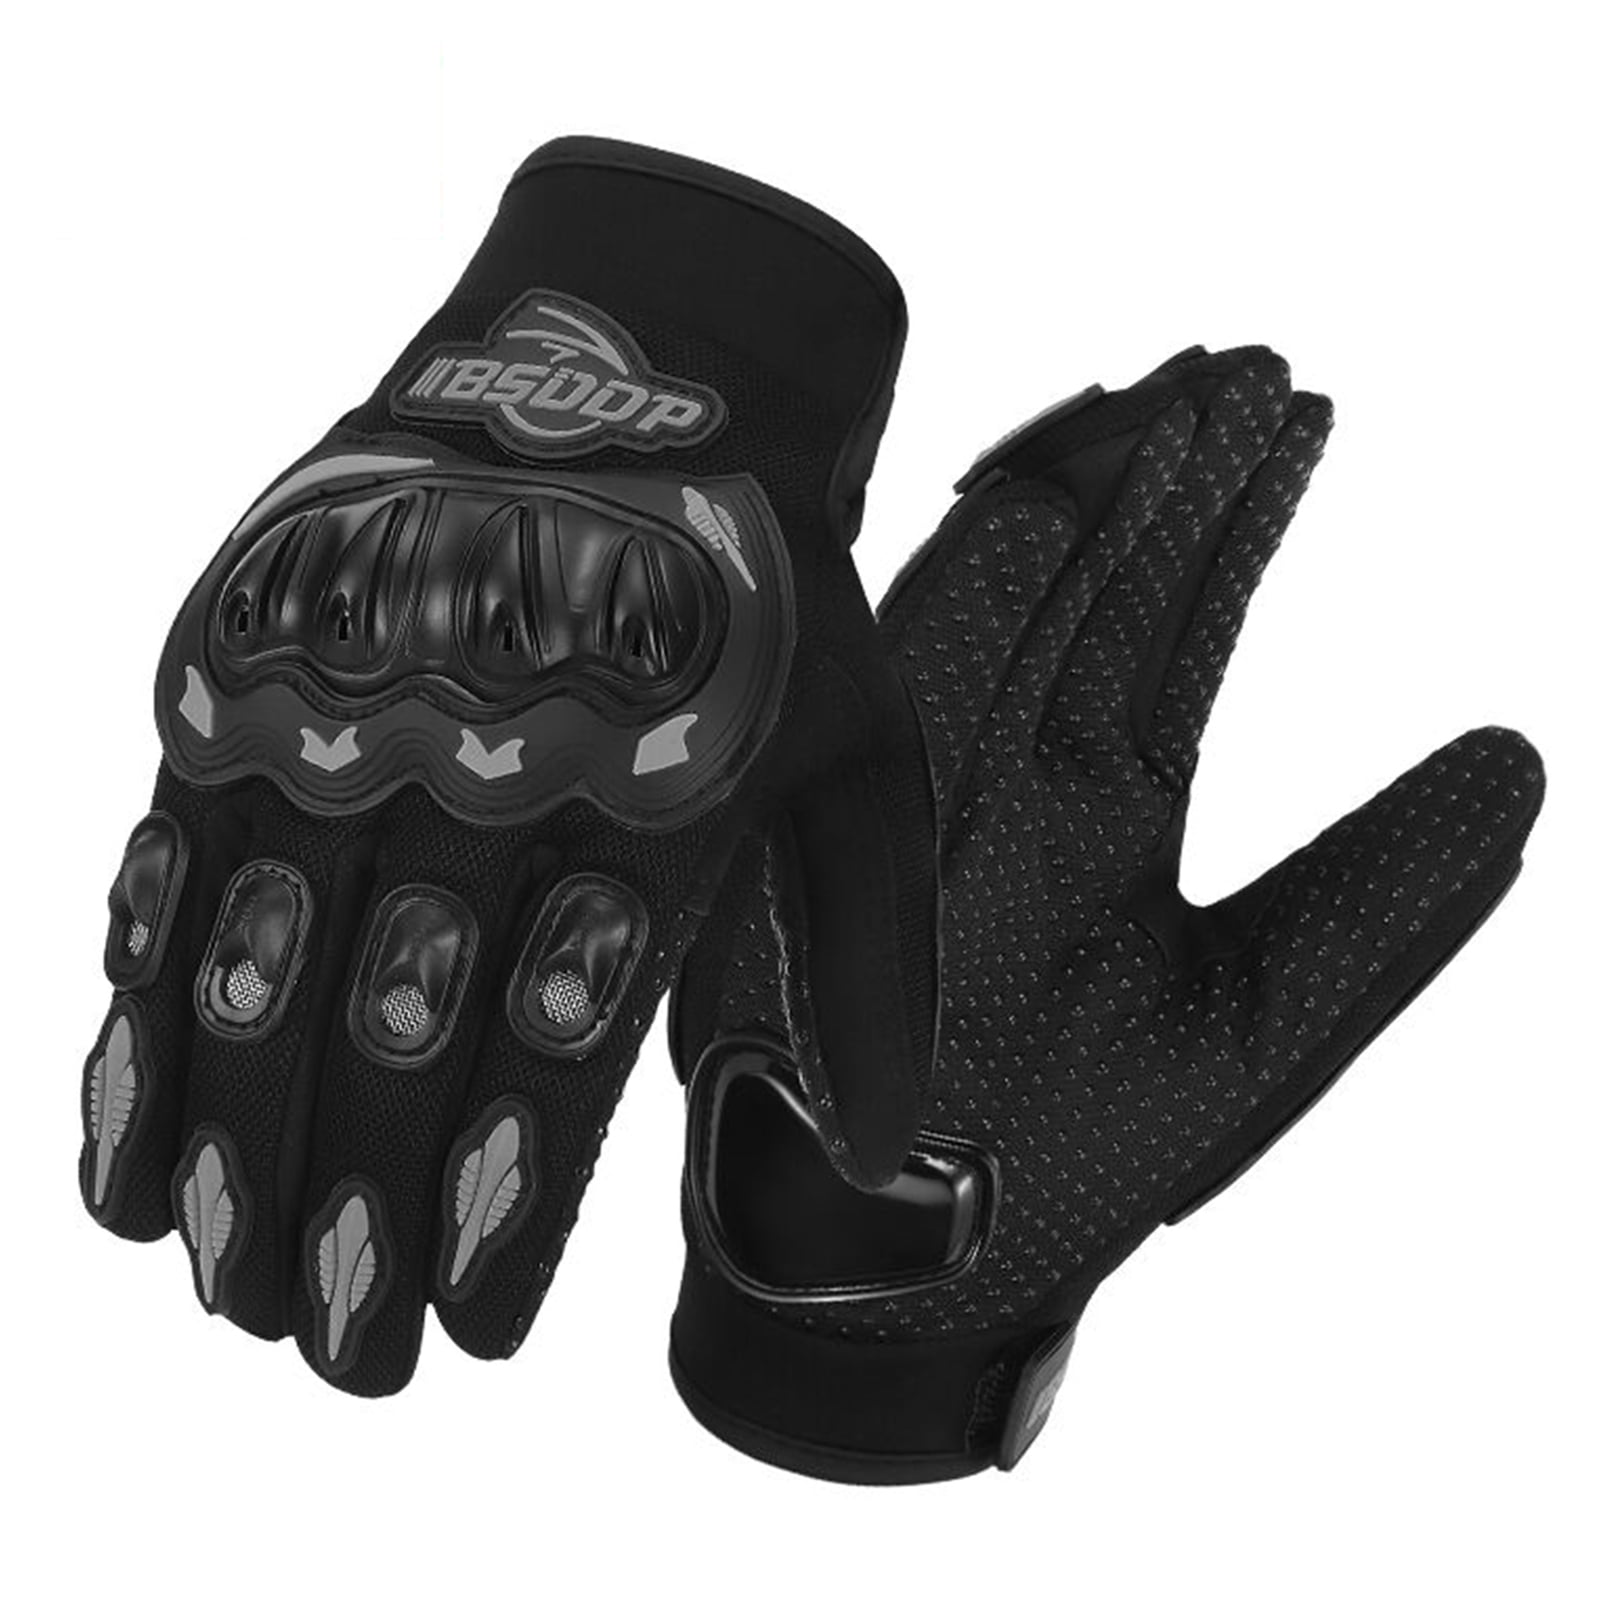 Outdoor Sports Cycling Motocross Motorcycle Gloves for Men Women Touchscreen Dirt Bike Gloves Breathable Full Finger Gloves Knuckle Protection Motocross Riding Gloves for Road Racing Climbing 